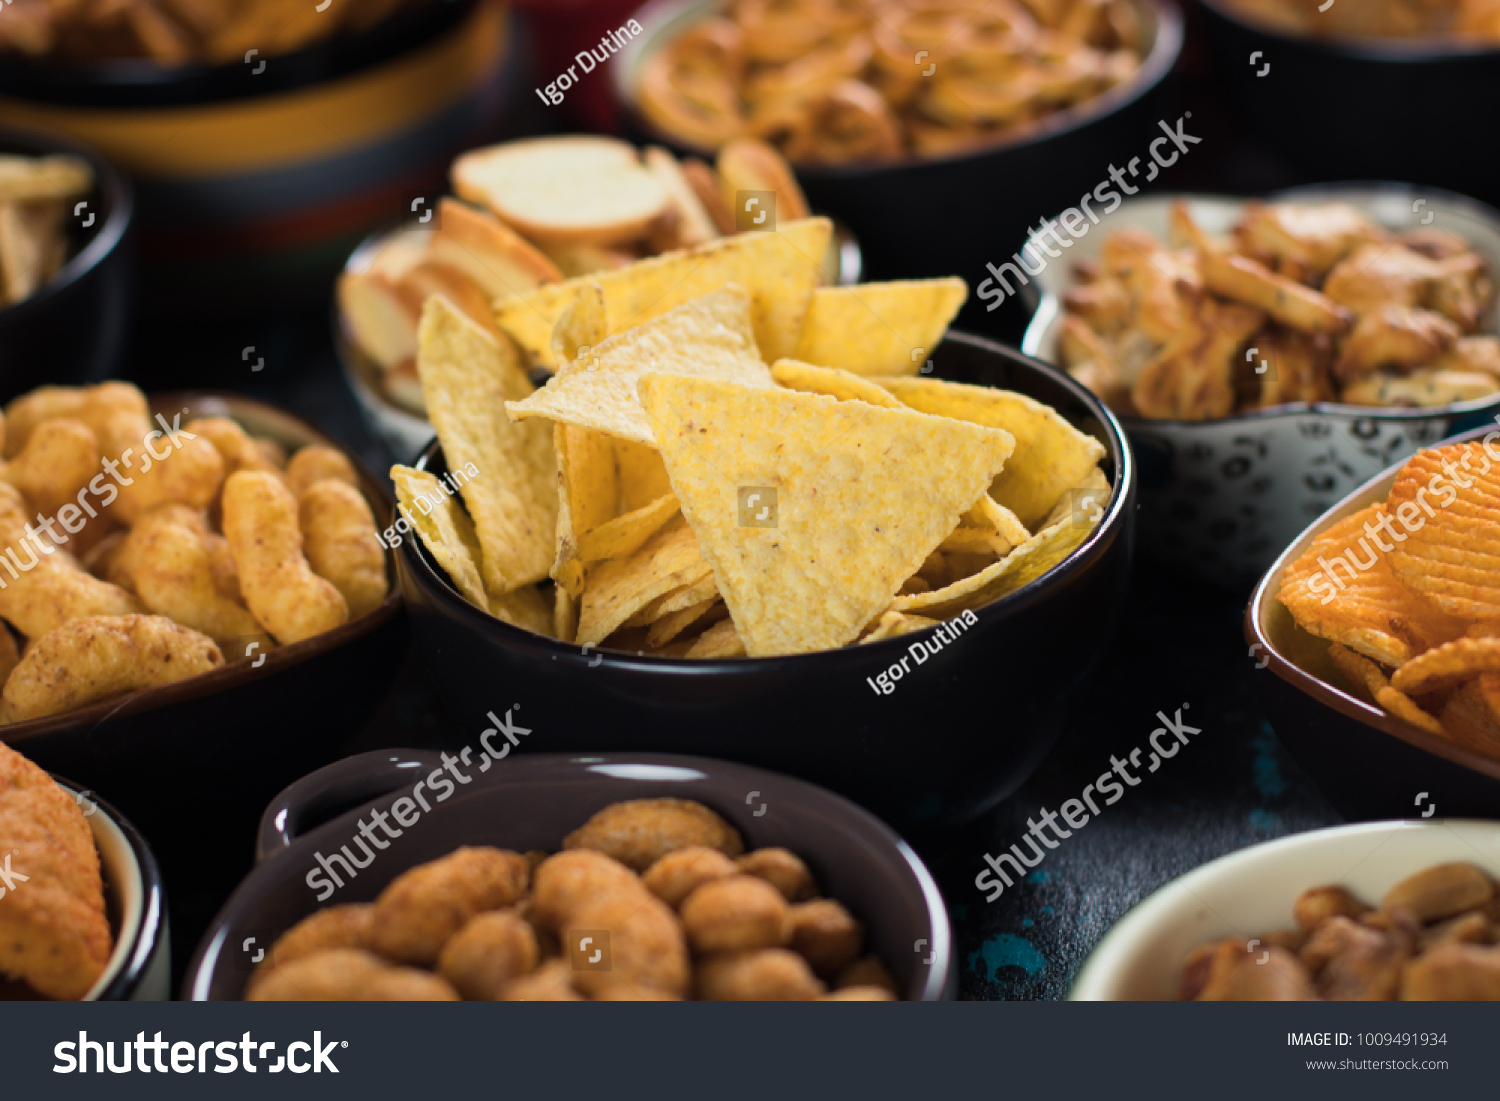 Salty snack including peanuts, potato chips and pretzels served as party food in bowls #1009491934